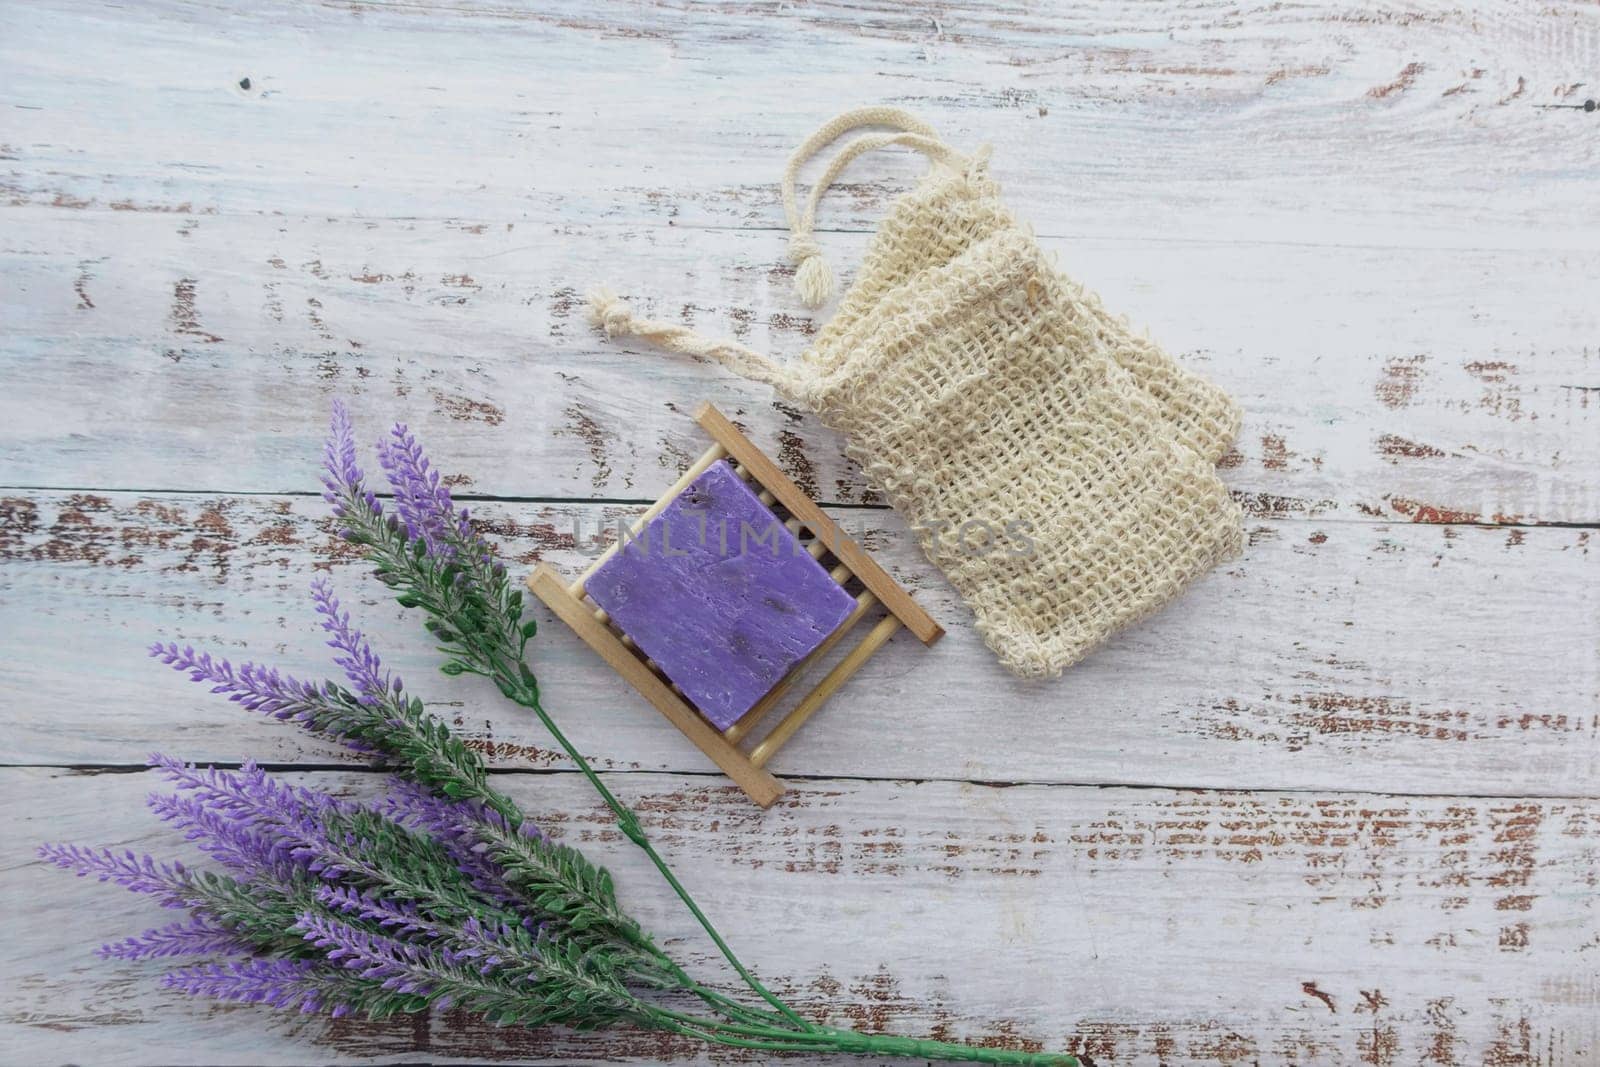 Homemade natural soap bar and lavender flower on table .